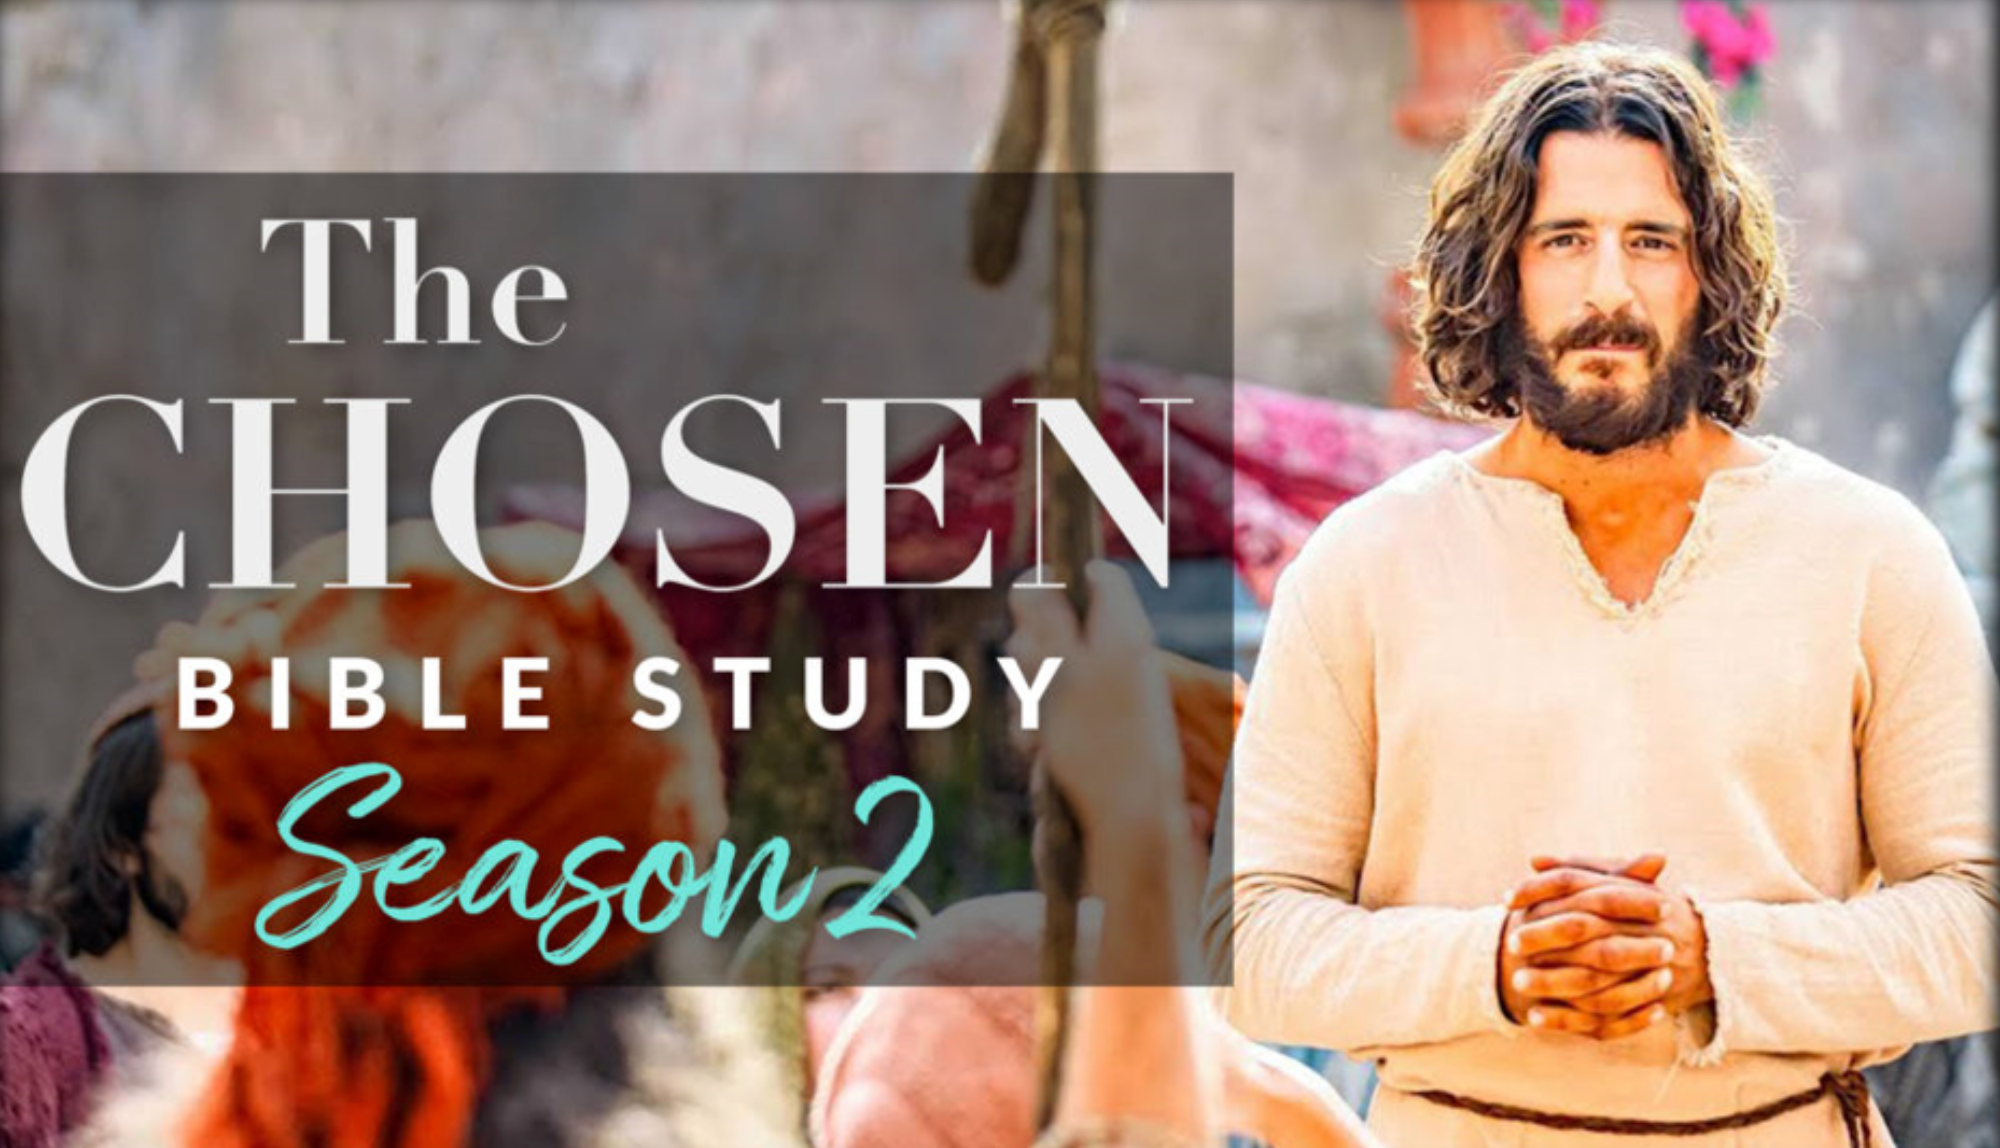 Fall 2023 Bible Study - Based on the TV series "The Chosen"